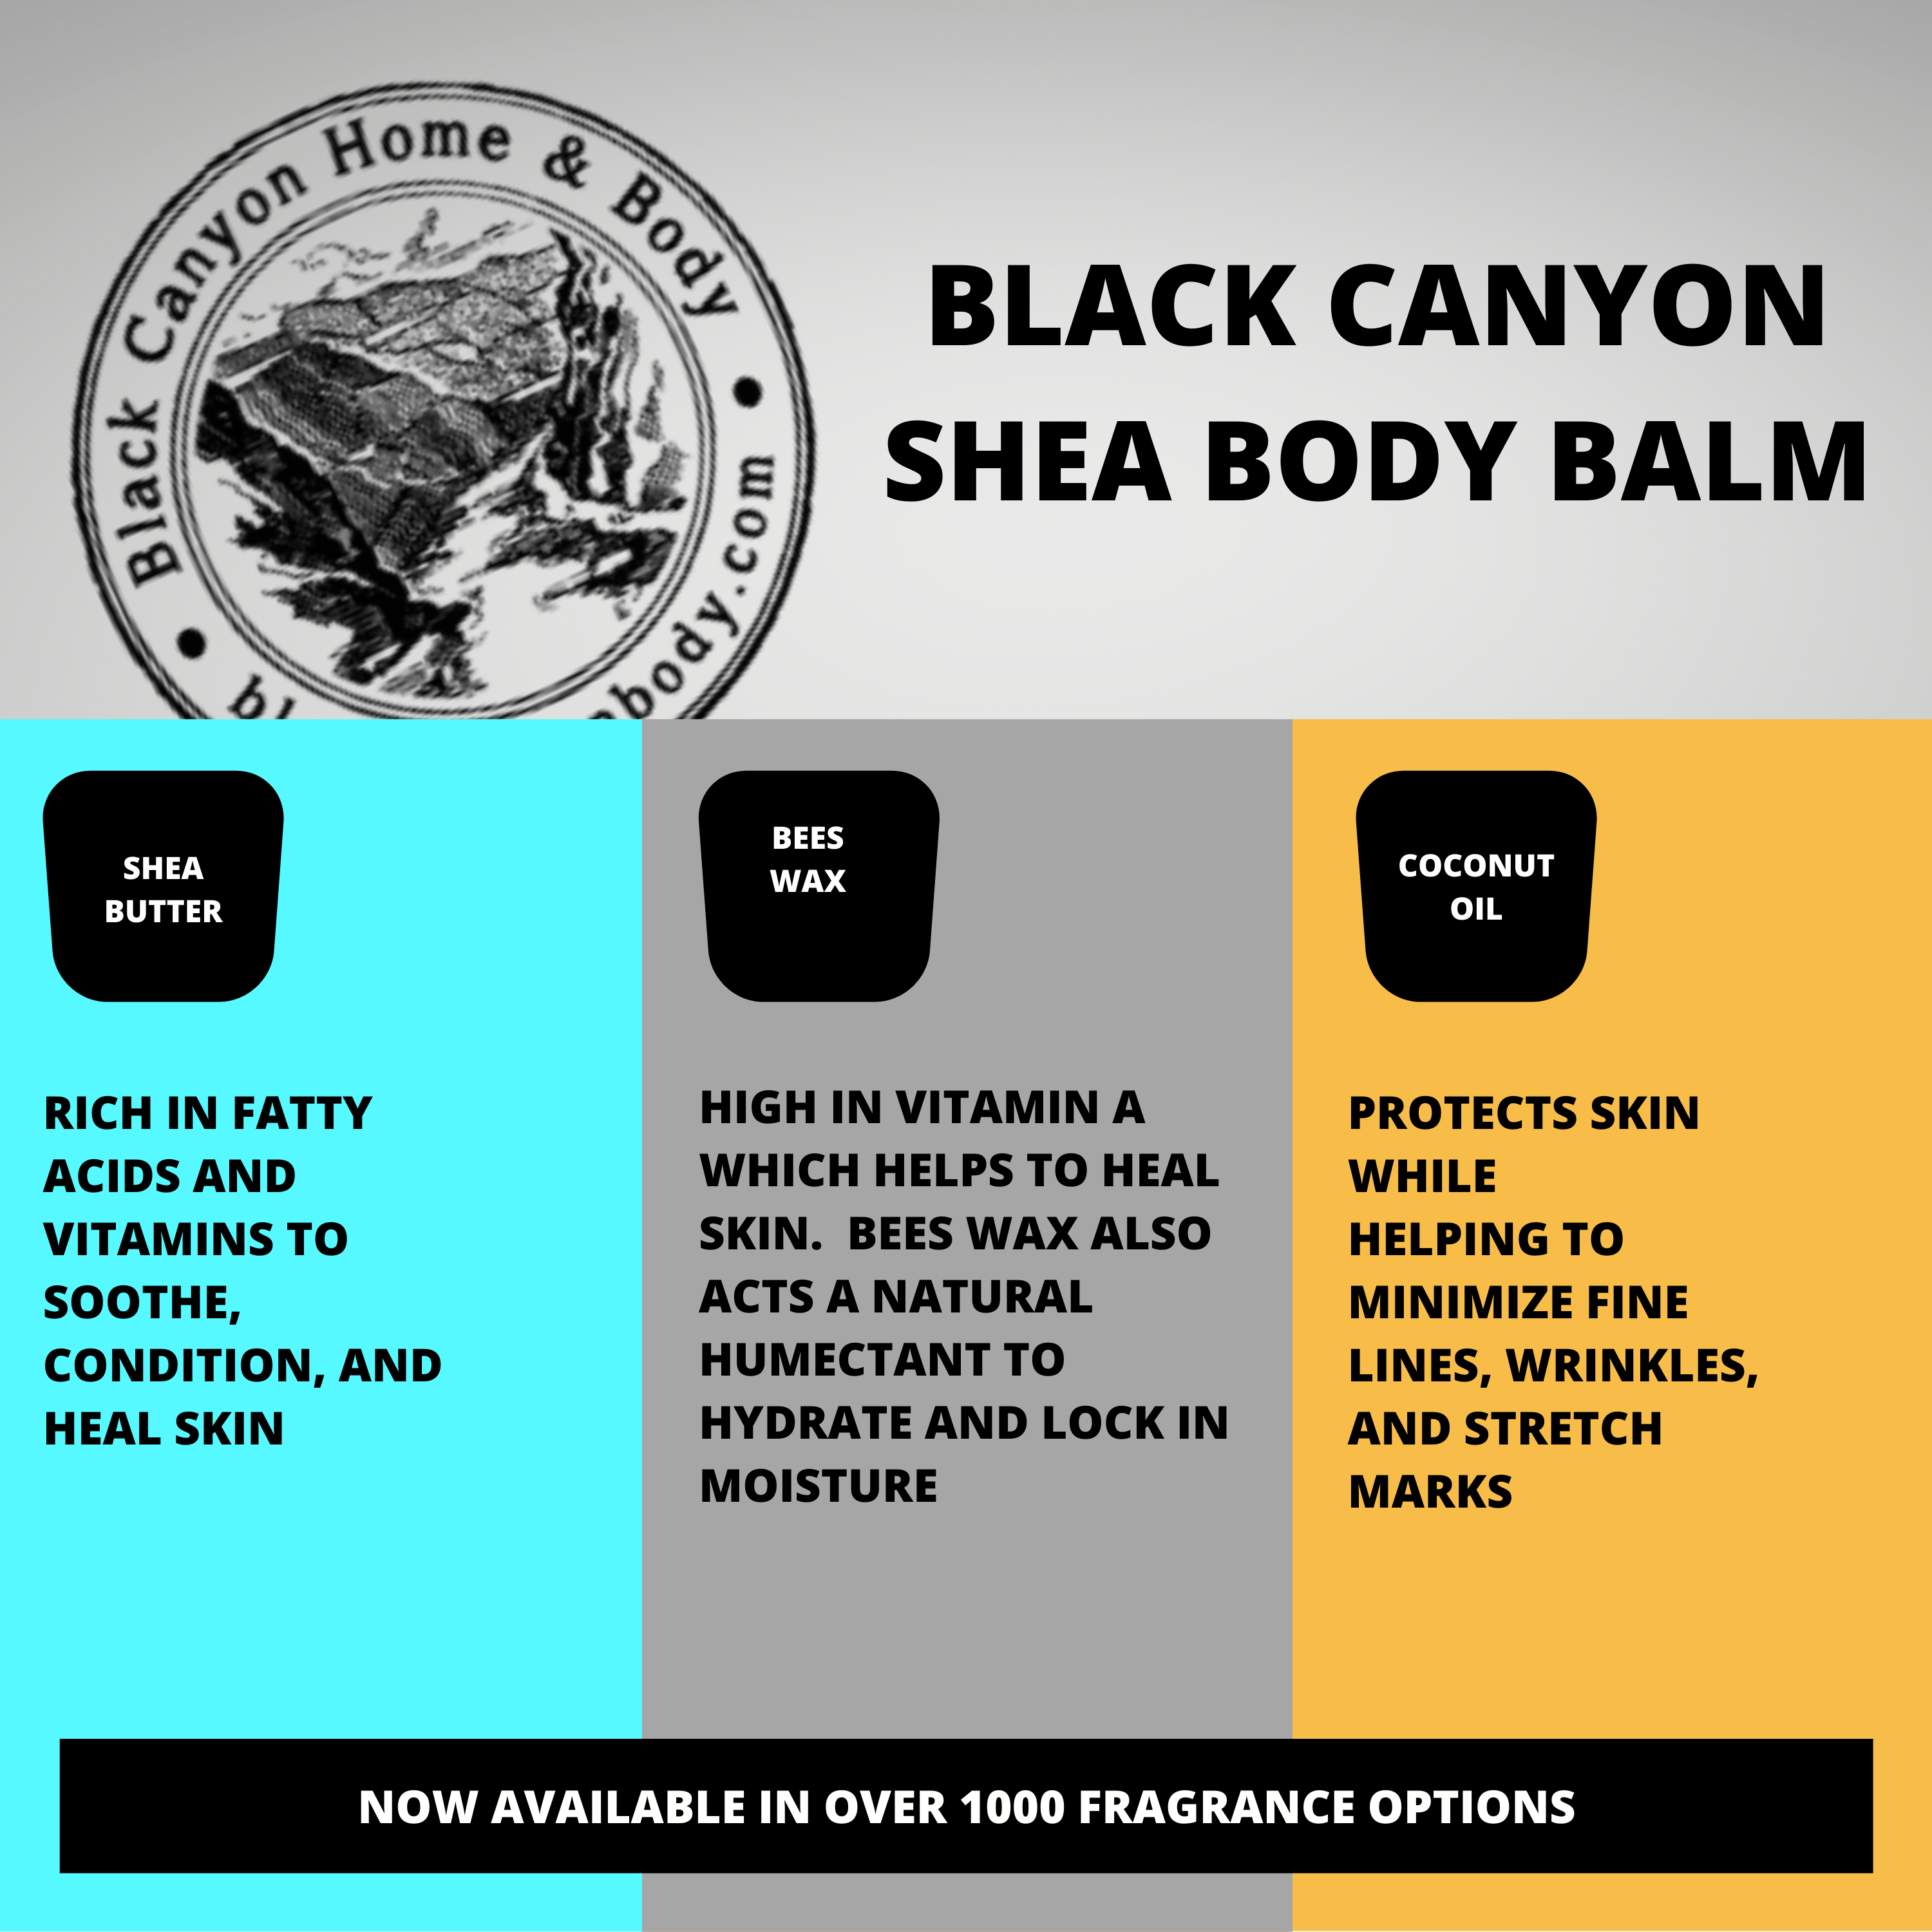 Black Canyon Kansas Sunflower Scented Natural Body Balm with Shea